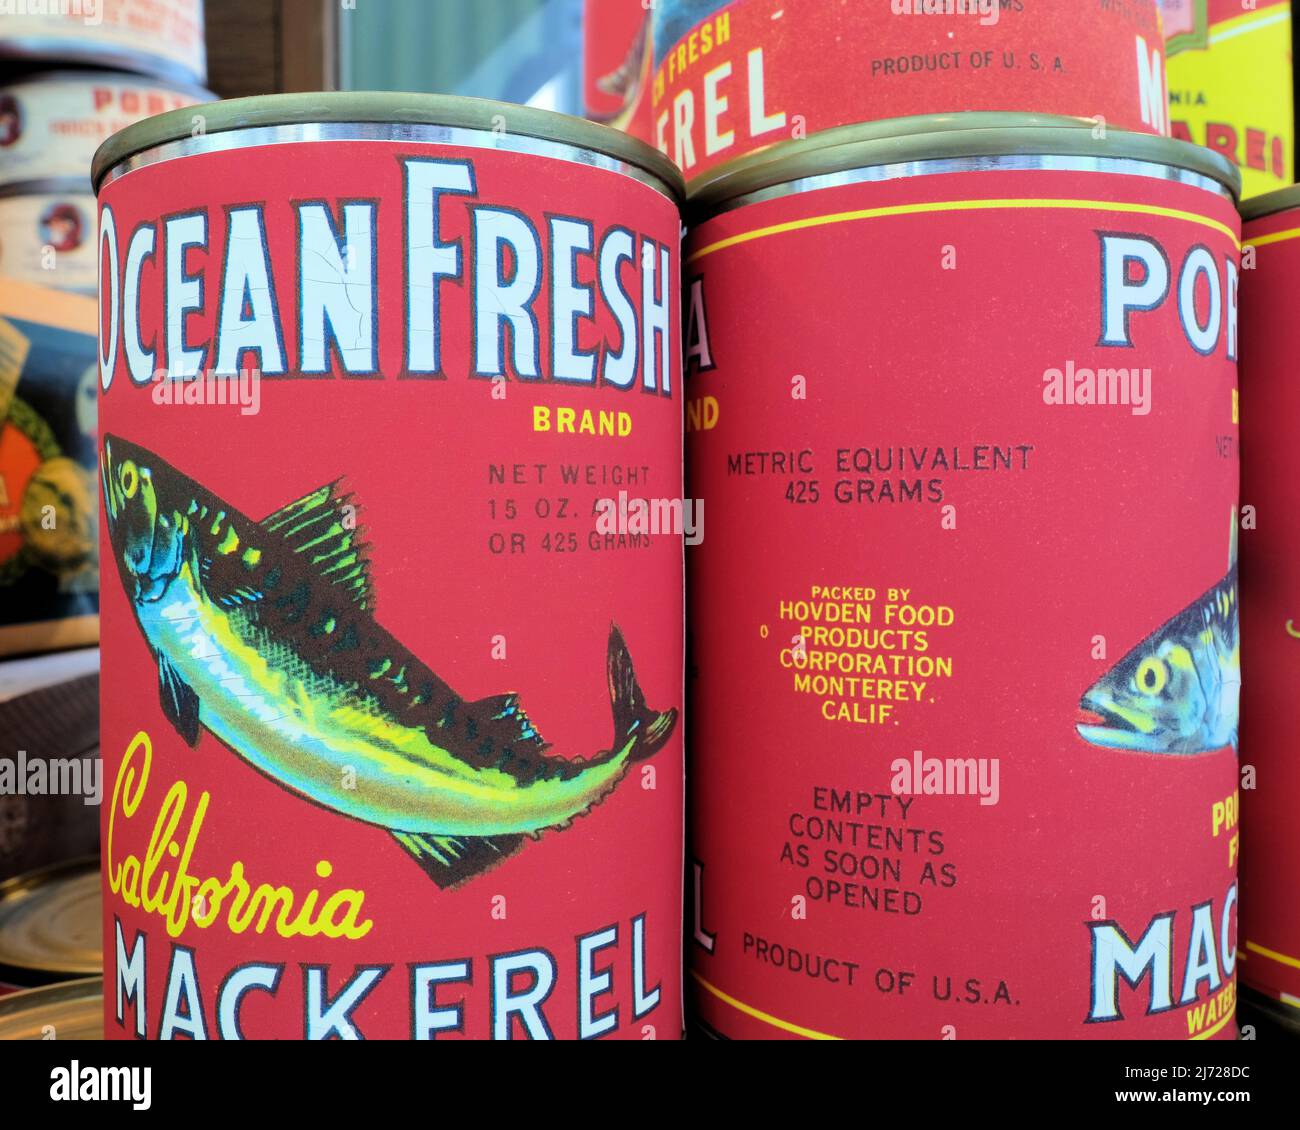 Ocean Fresh brand mackerel tin can packed and processed by the